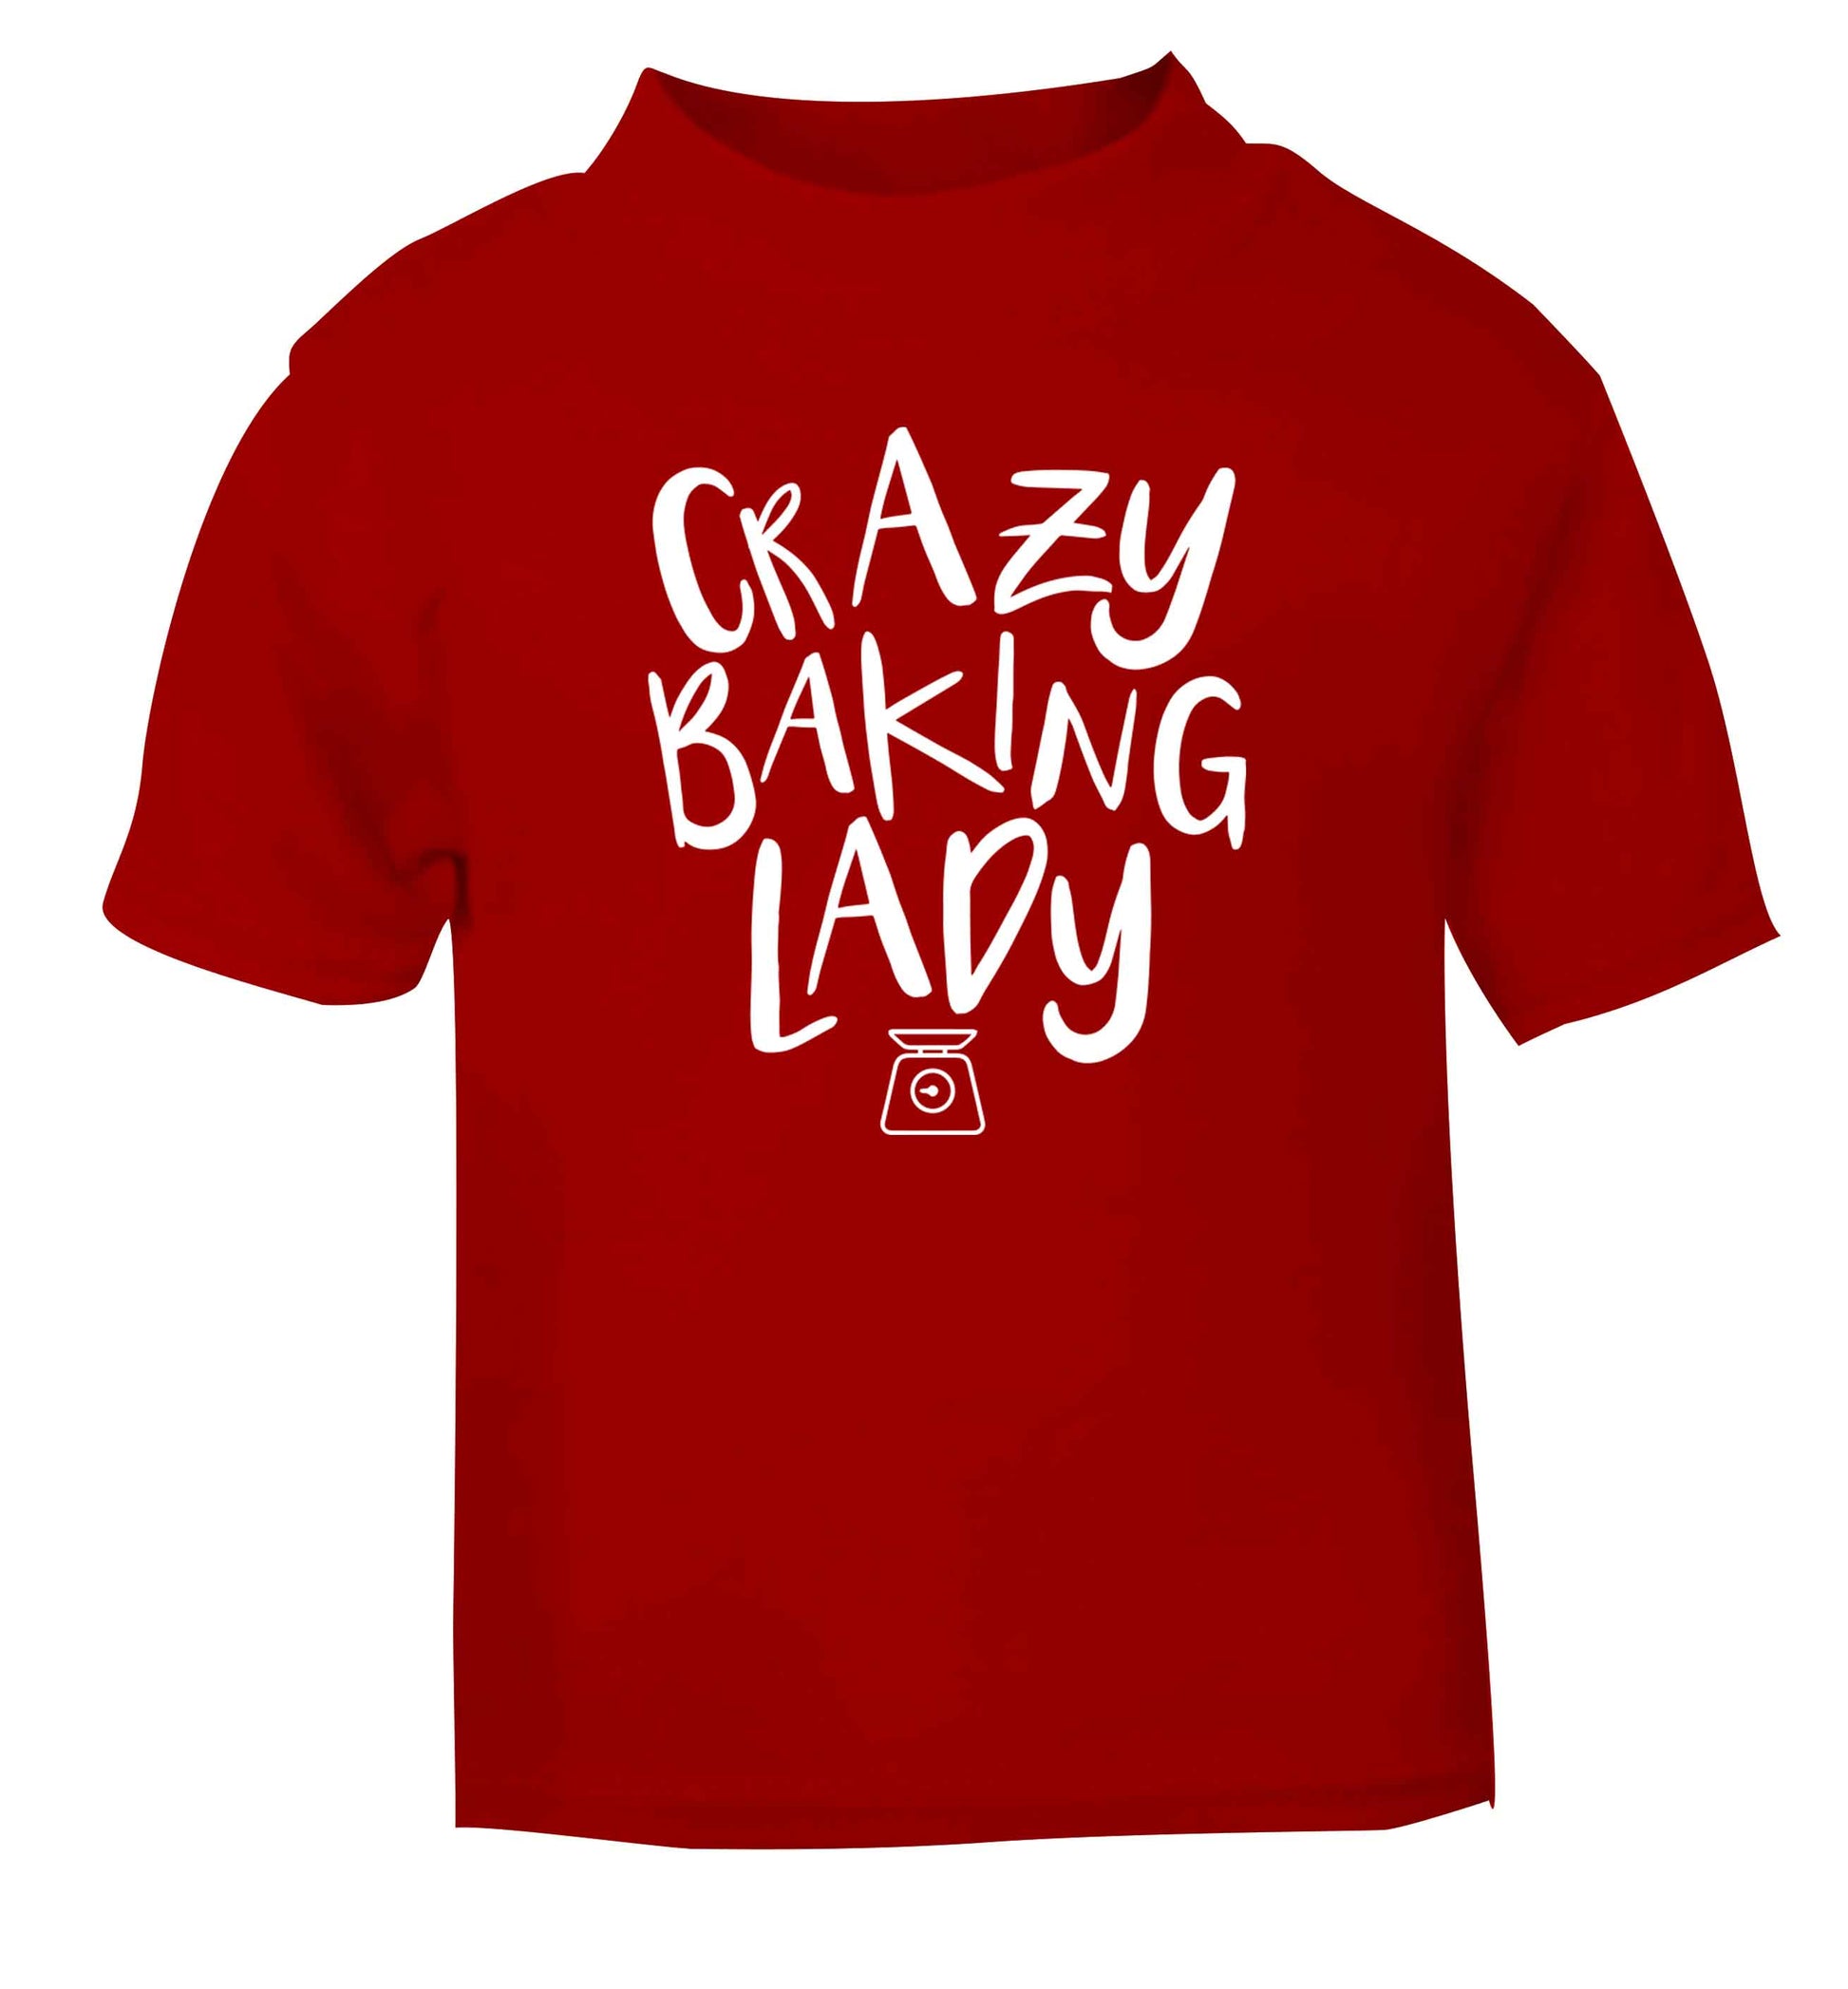 Crazy baking lady red Baby Toddler Tshirt 2 Years